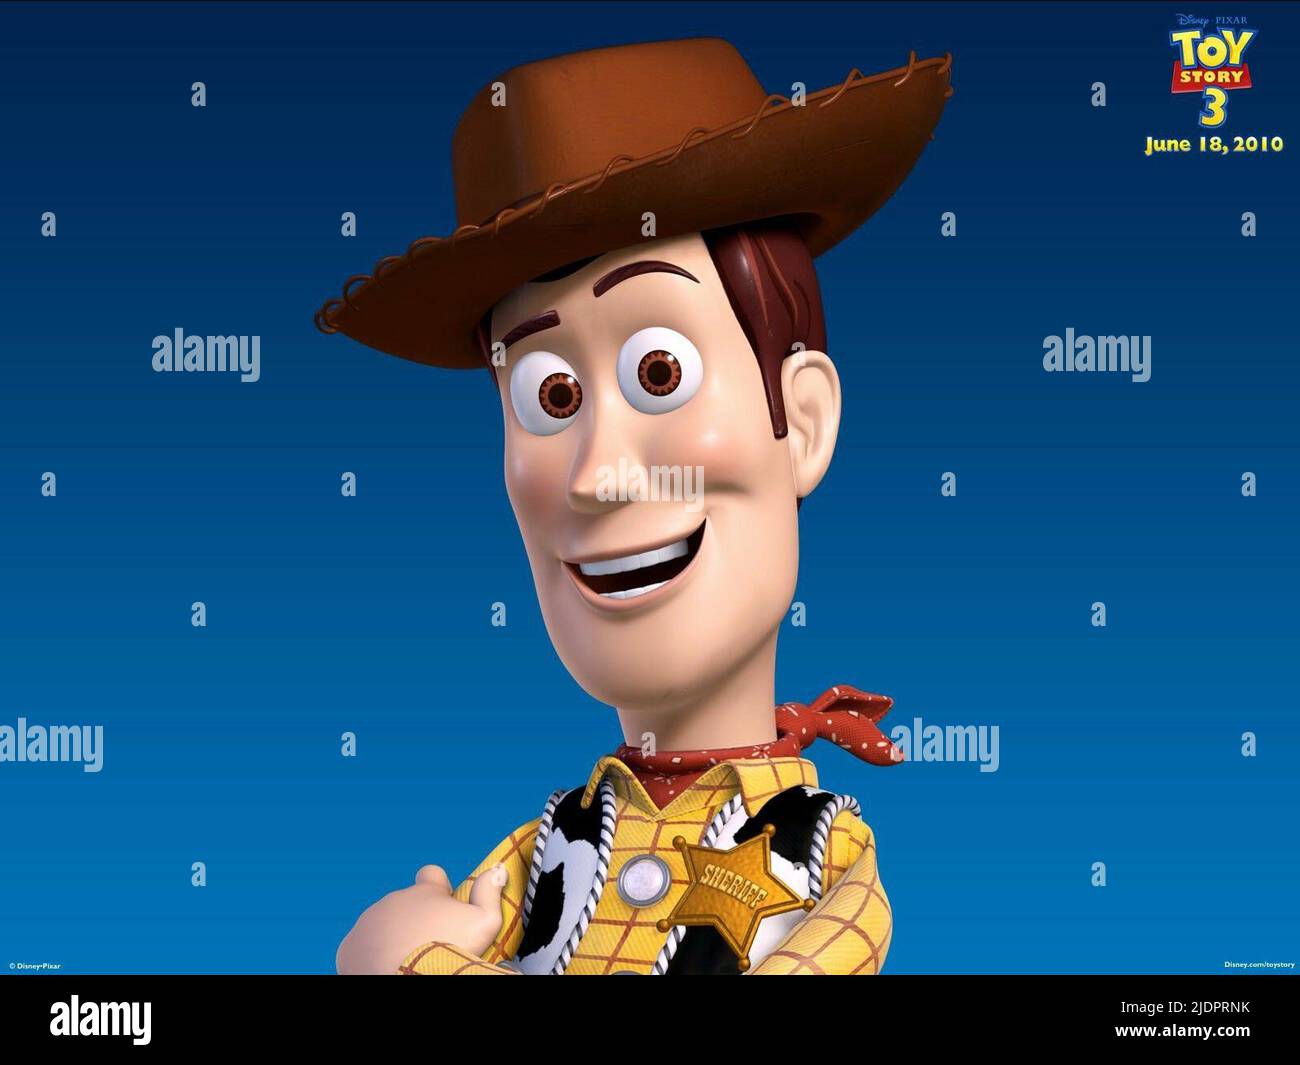 WOODY, TOY STORY 3, 2010, Stock Photo